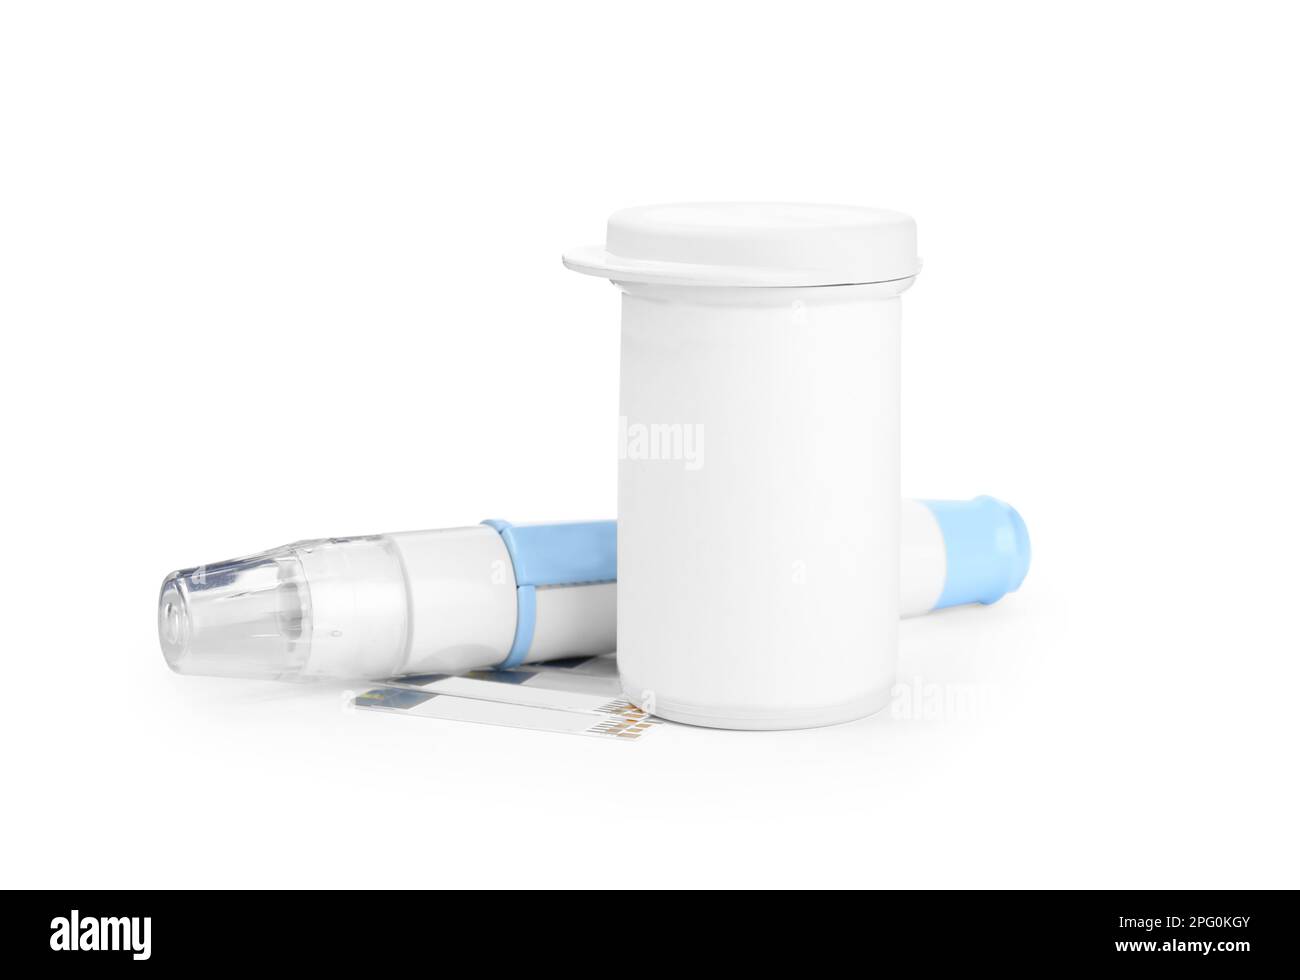 Lancet pen, container and test strips Diabetes control Stock Photo